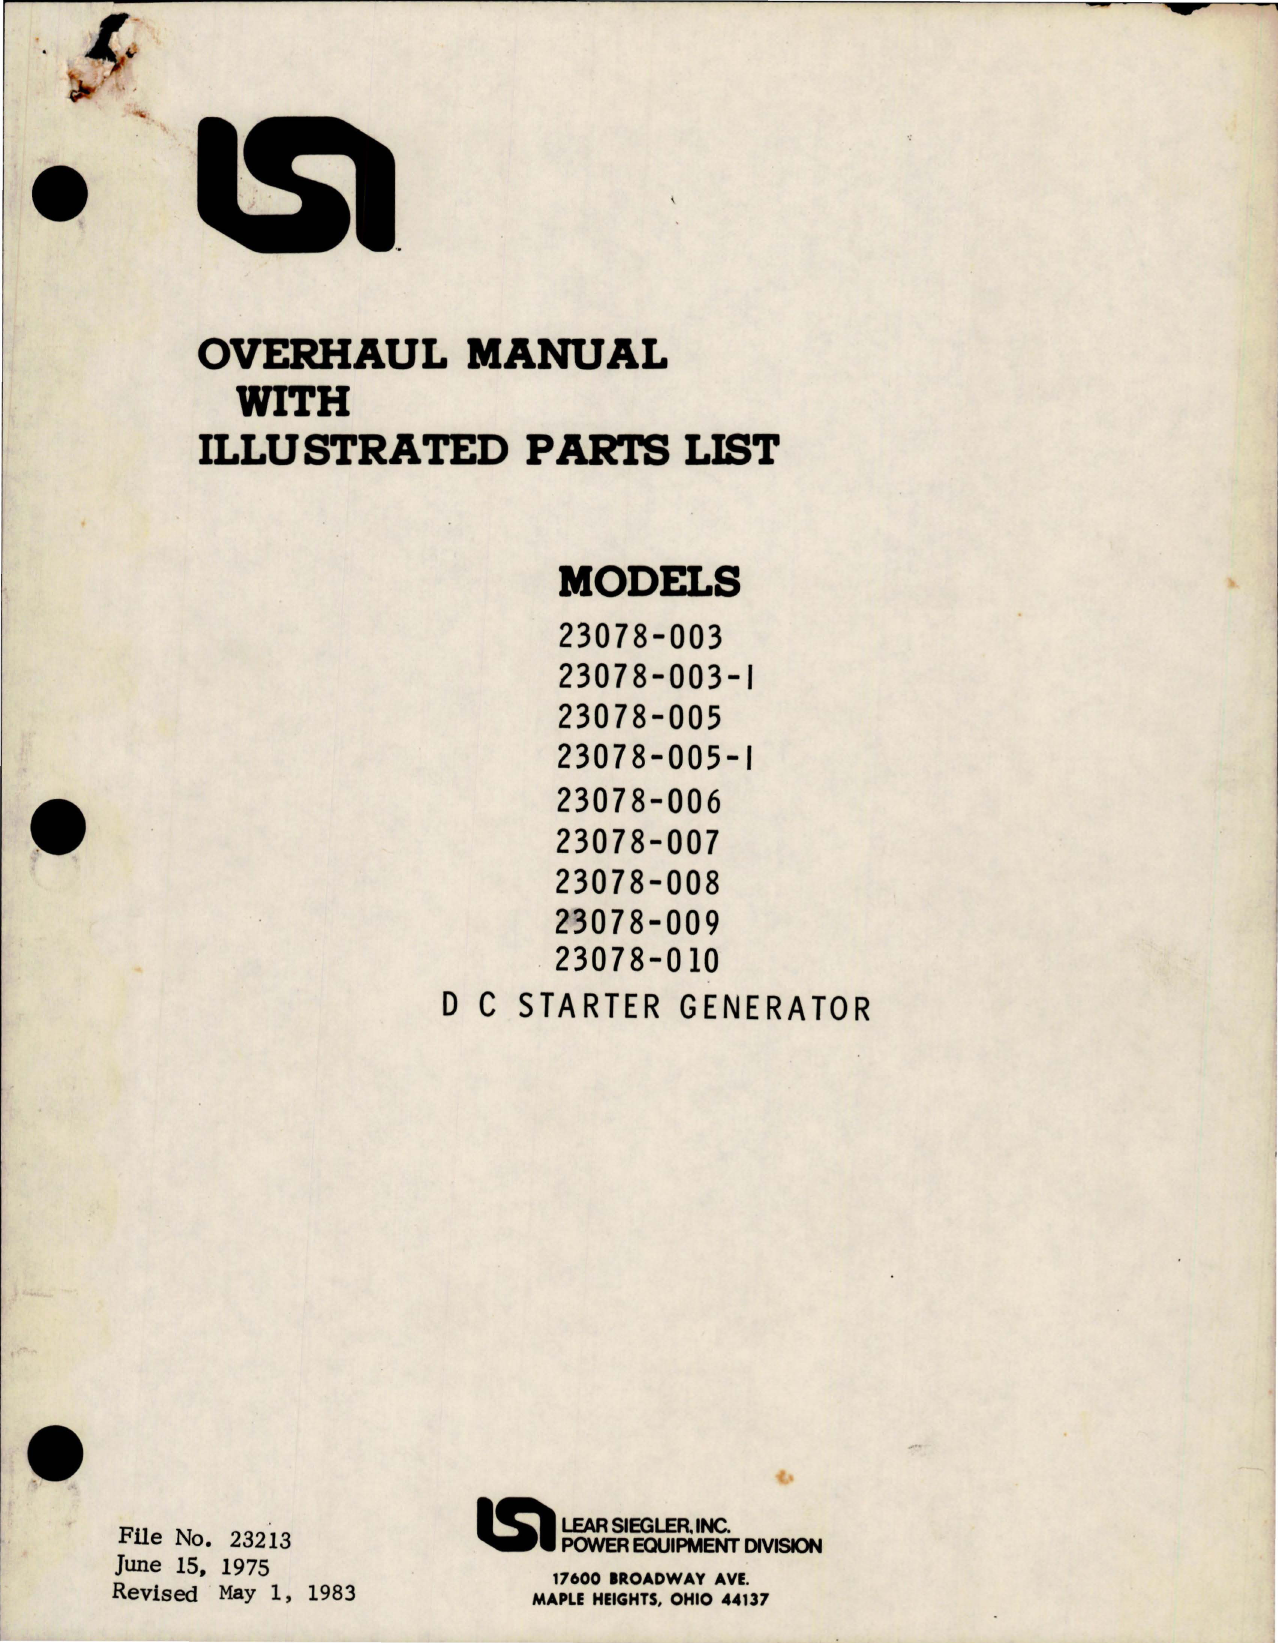 Sample page 1 from AirCorps Library document: Overhaul Manual with Parts List for  DC Starter Generator 